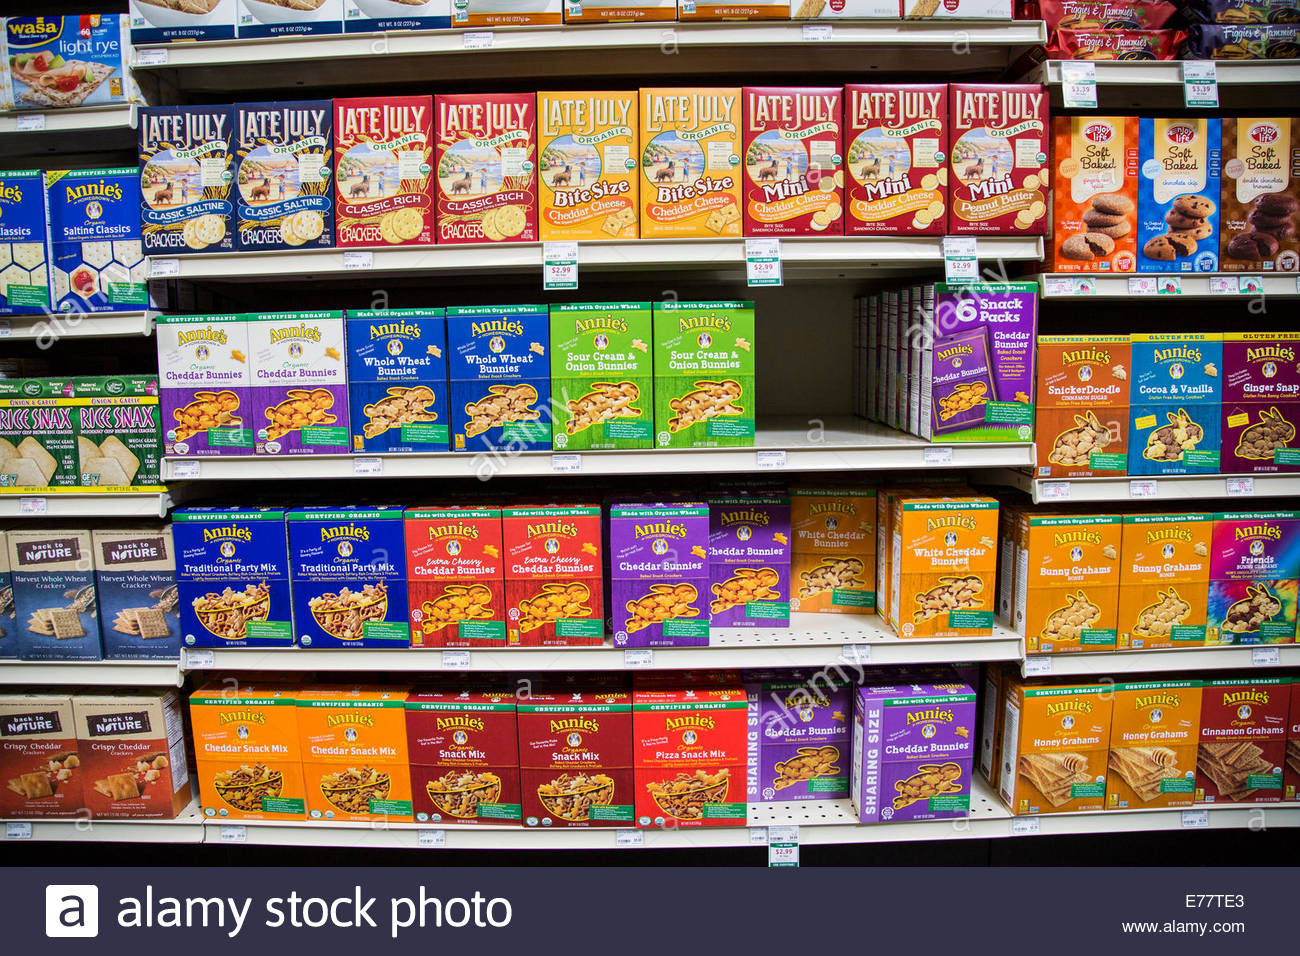 Healthy Grocery Store Snacks
 A natural foods grocery store aisle with shelves of